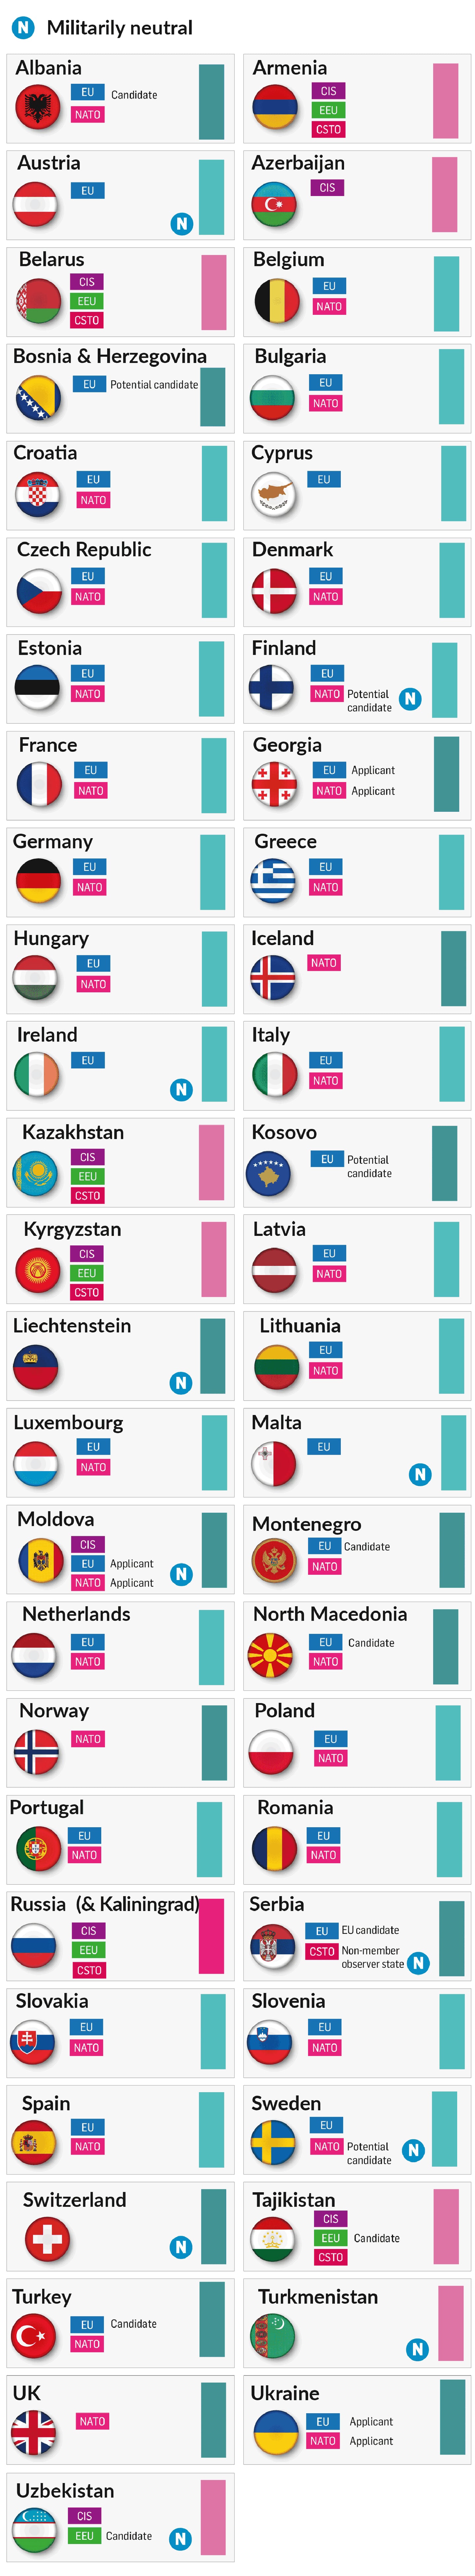 Europe and Russia, 2022: A fast-changing continent in five graphics